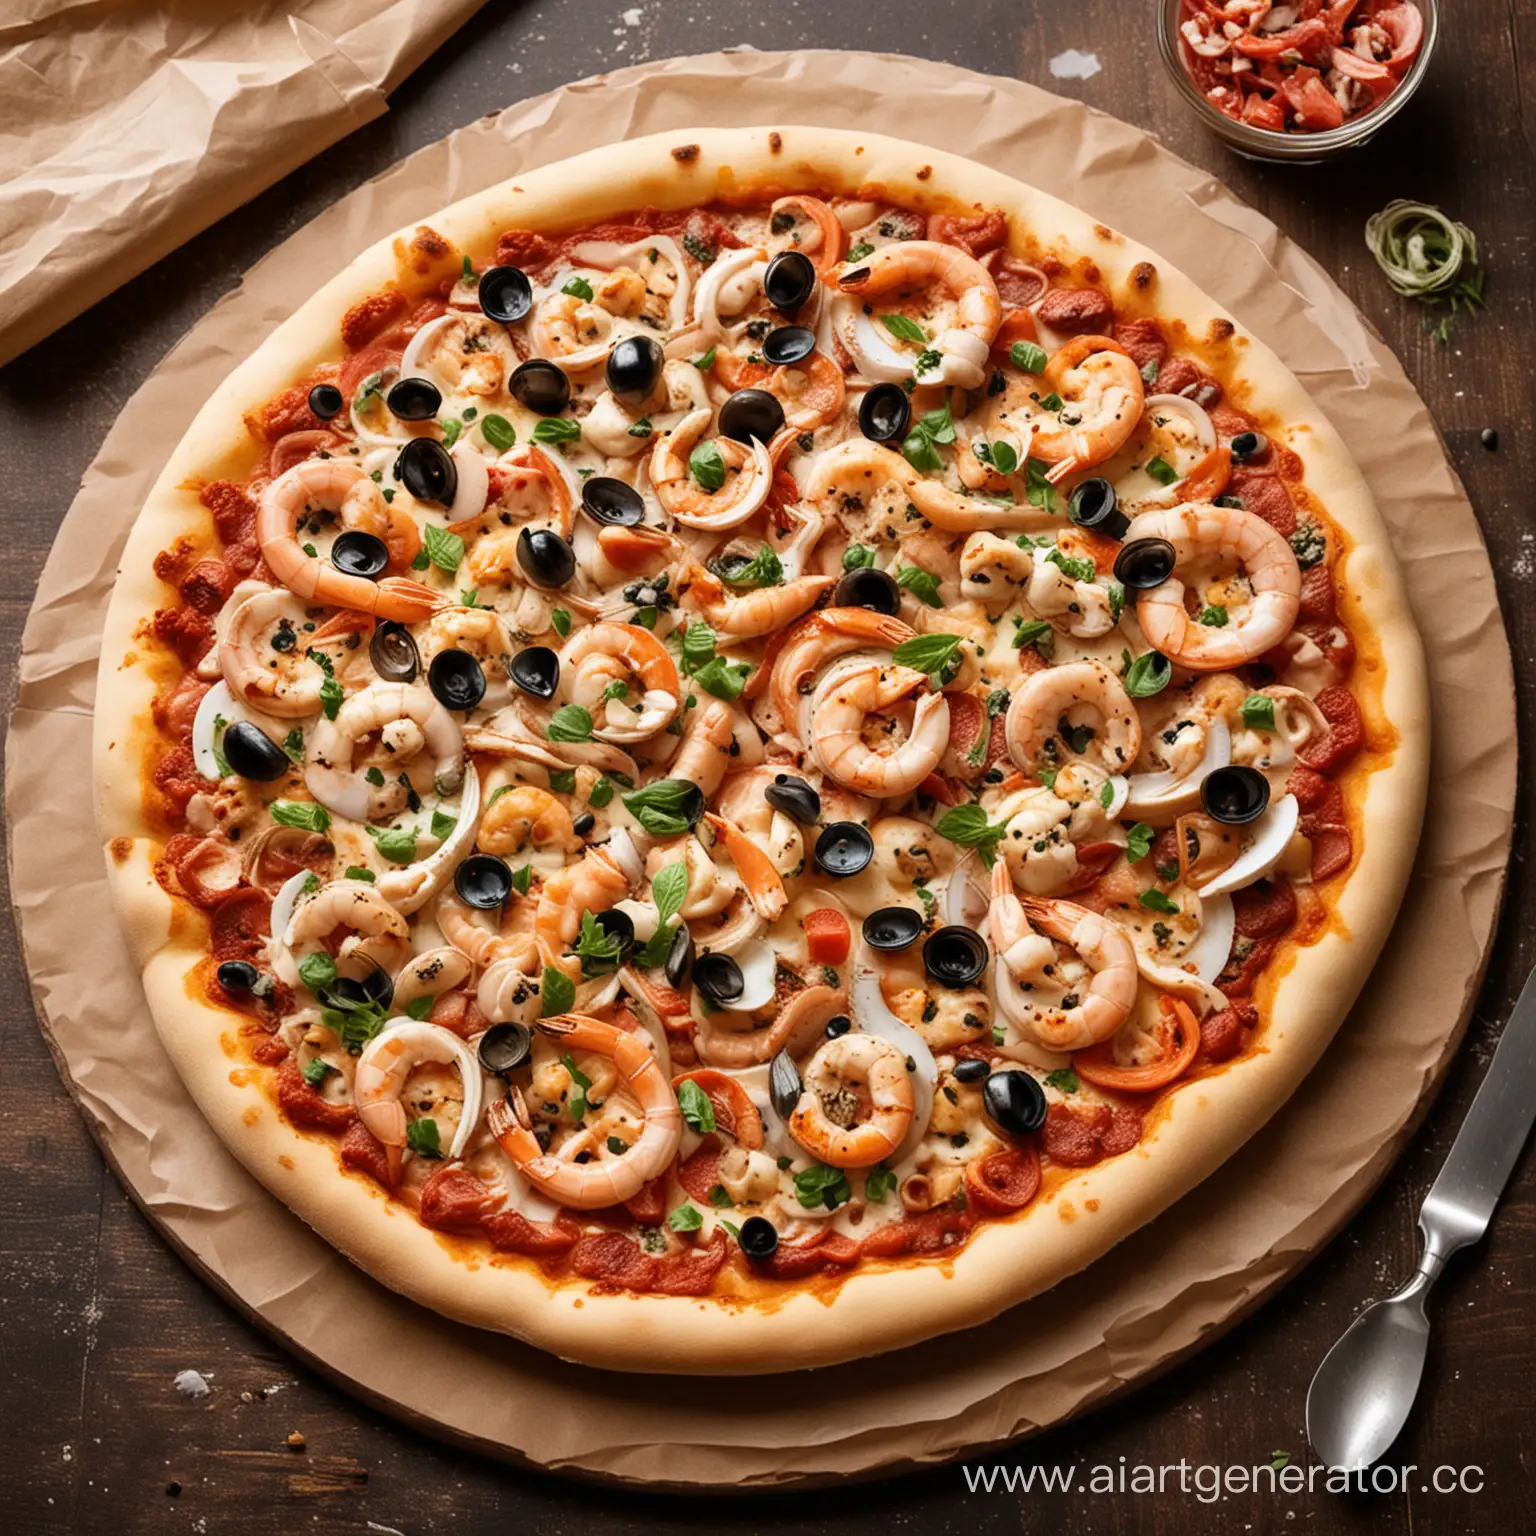 Delicious-Seafood-Pizza-A-Savory-Combination-of-Fresh-Seafood-and-Crispy-Crust